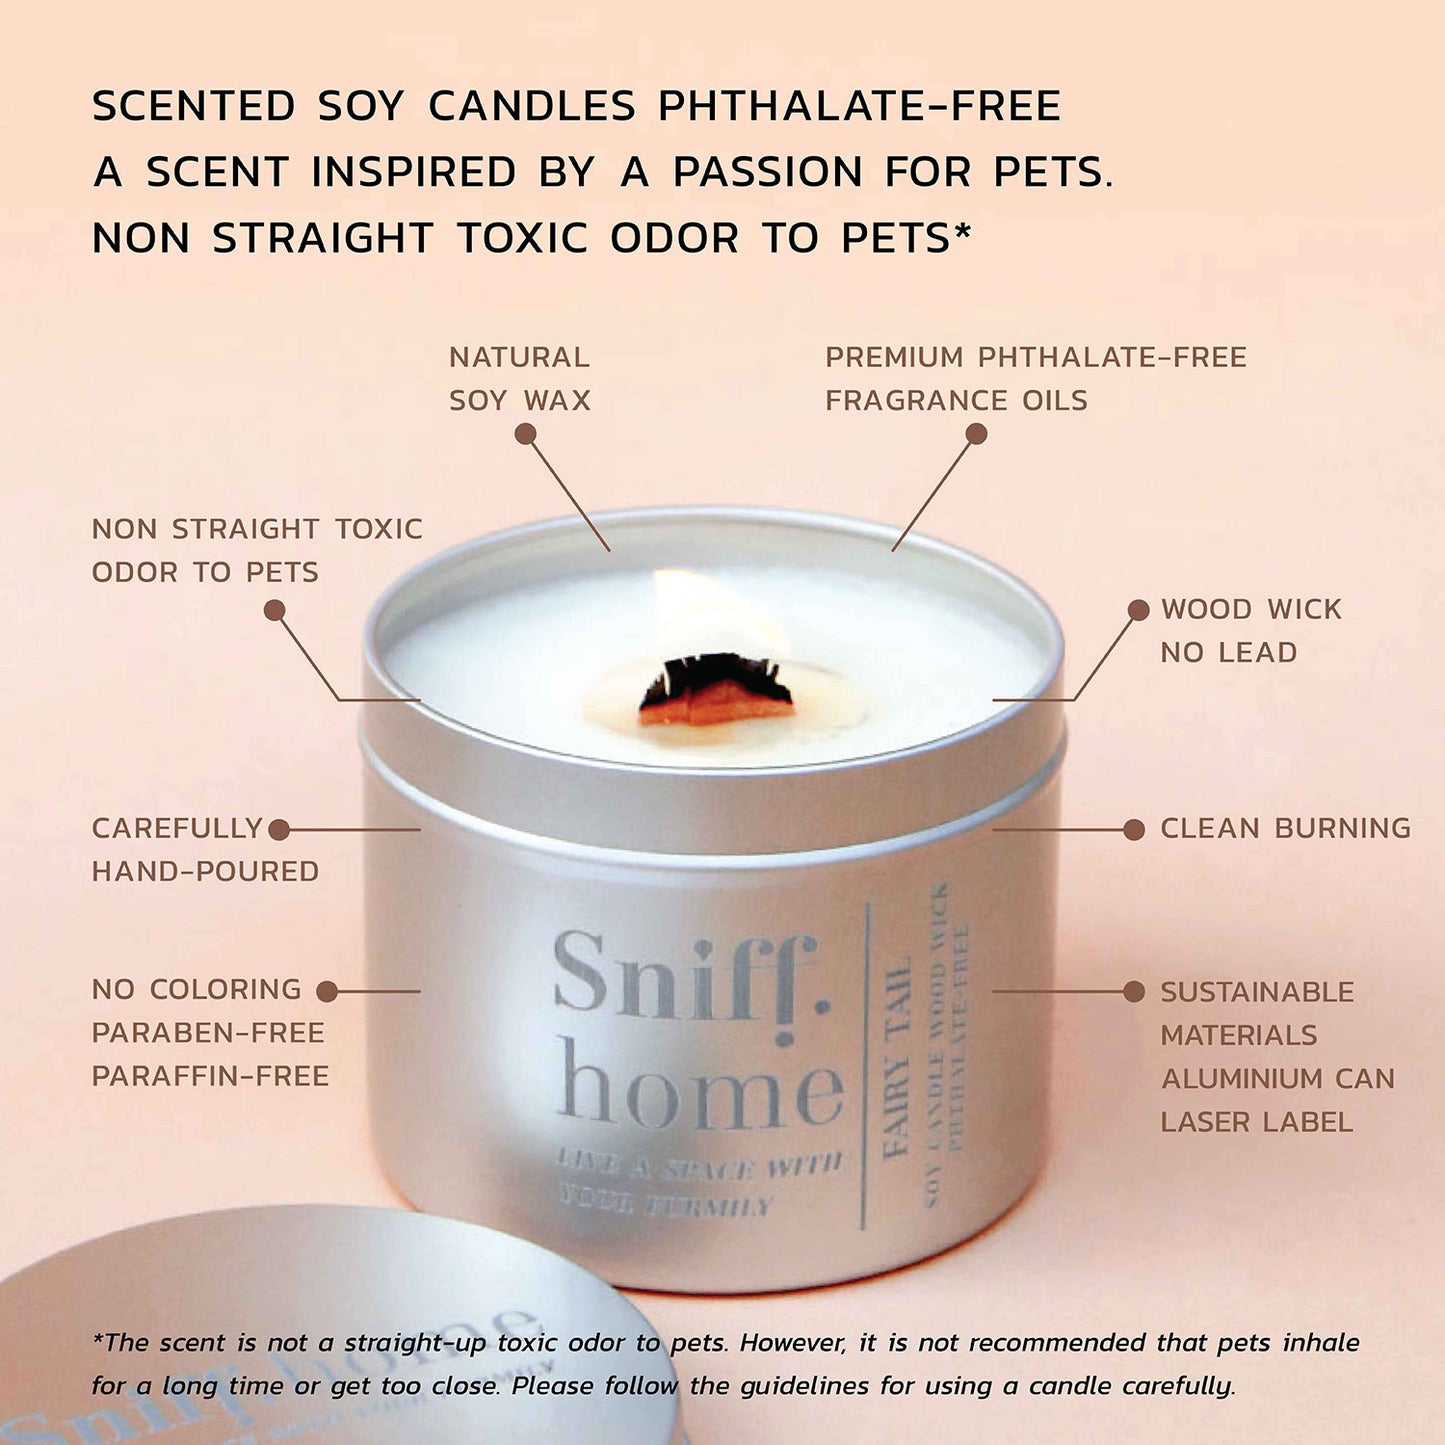 Pet odor candles - Scented soy candle - Furmily scent